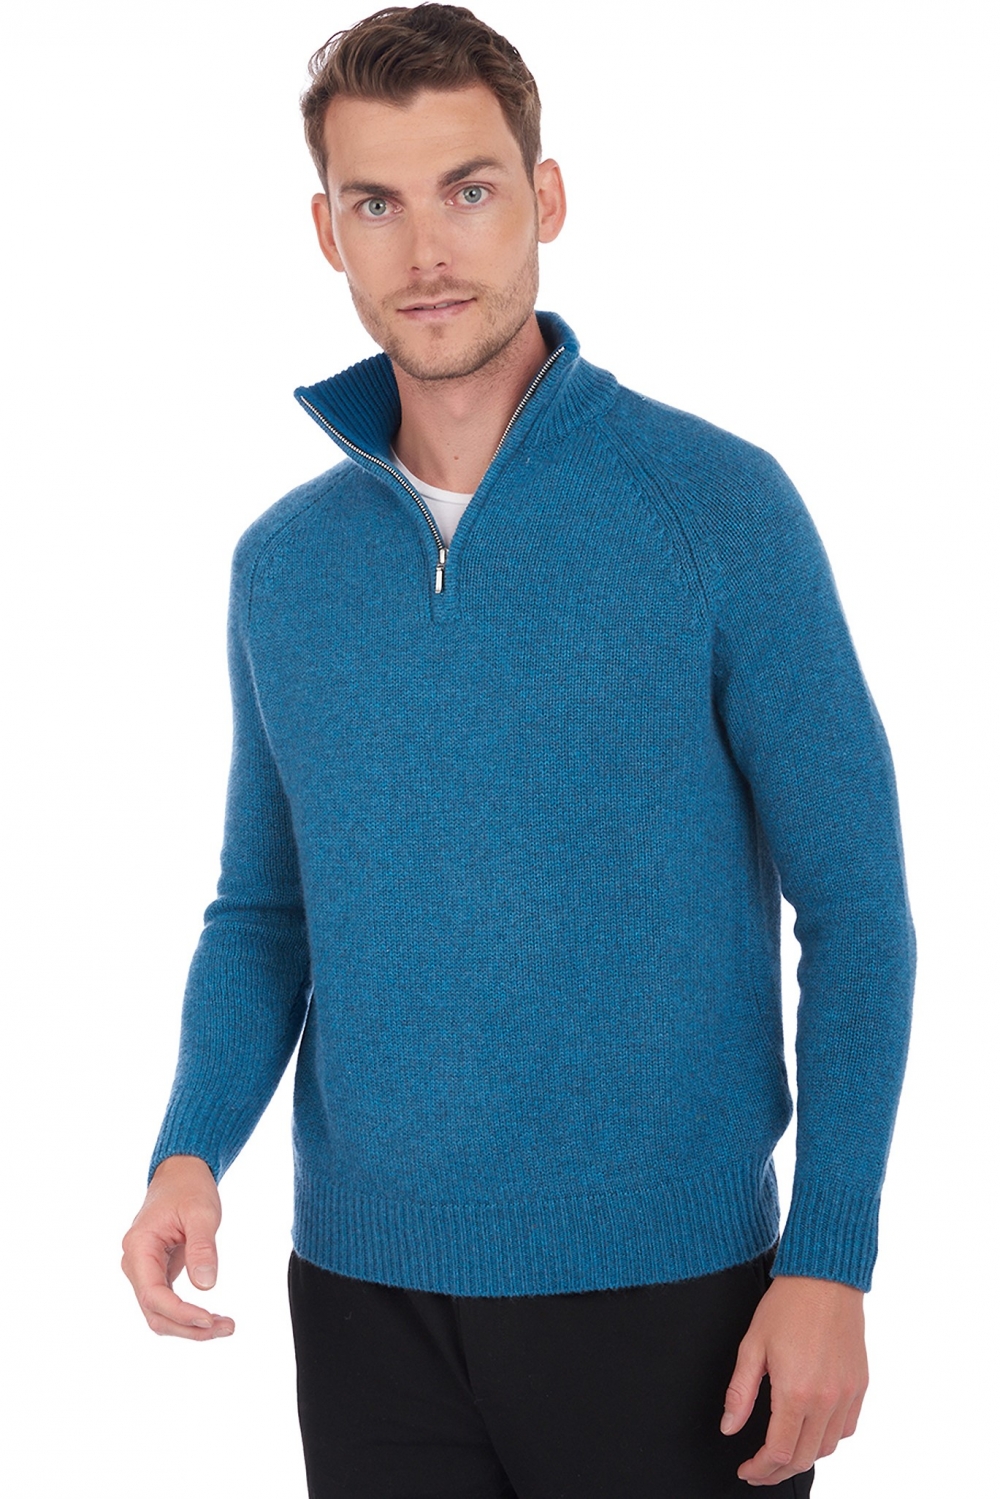 Cachemire pull homme angers manor blue bleu canard 3xl